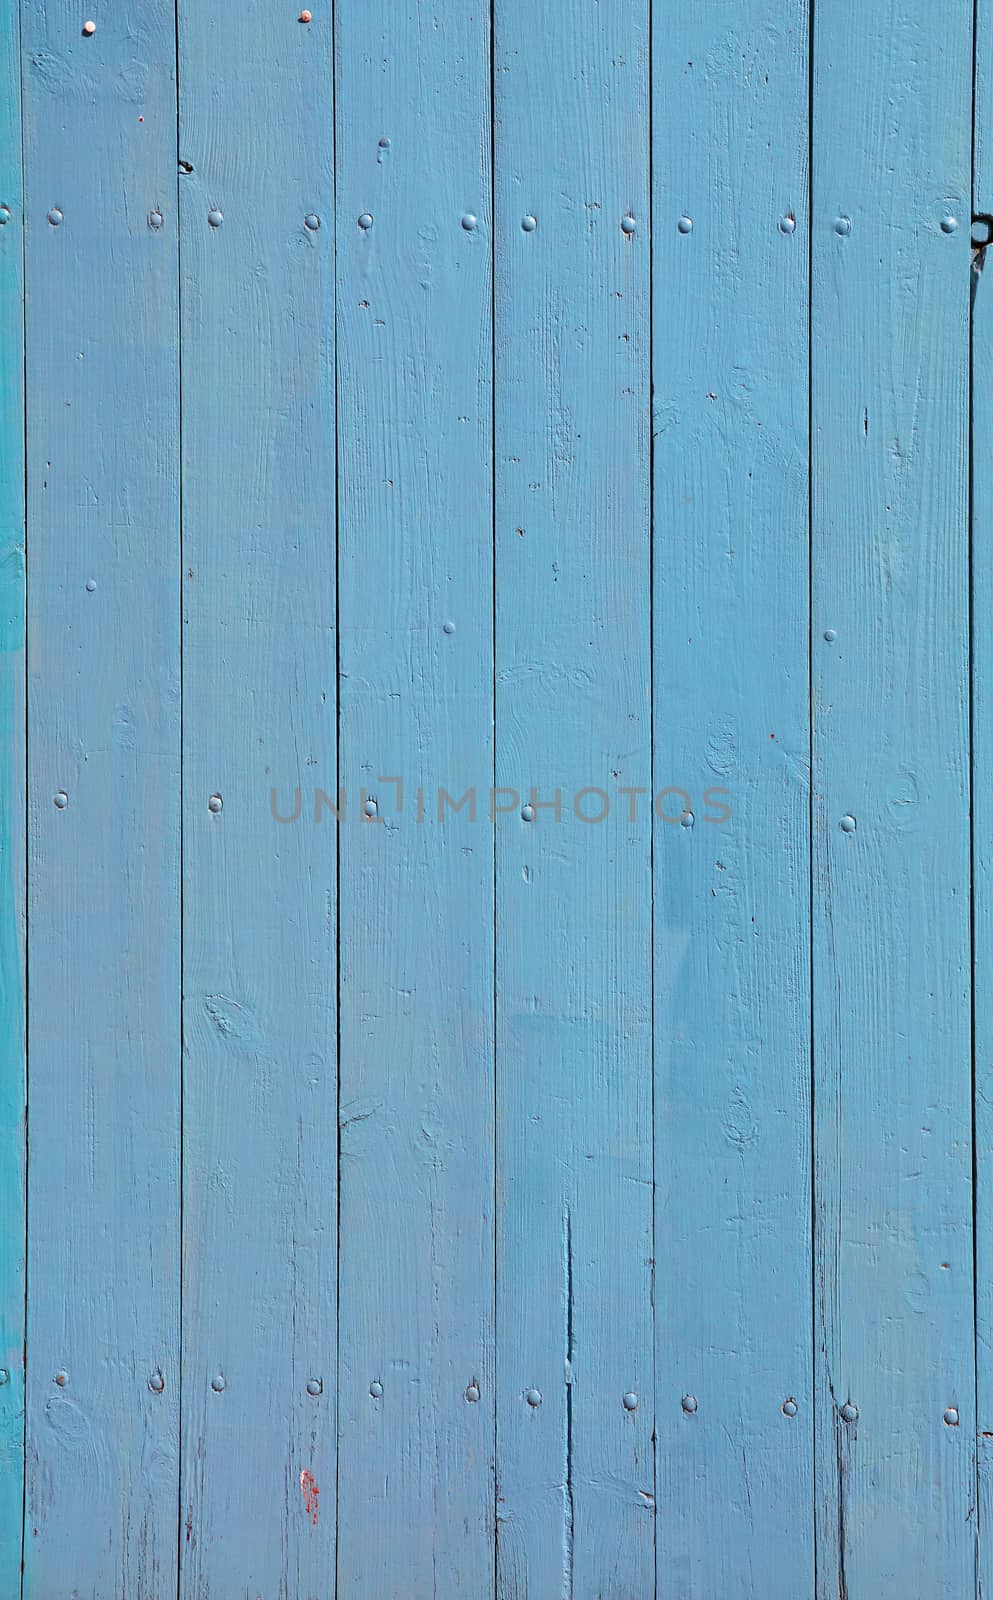 Close up background texture of blue vintage painted wooden planks, rustic style wall panel